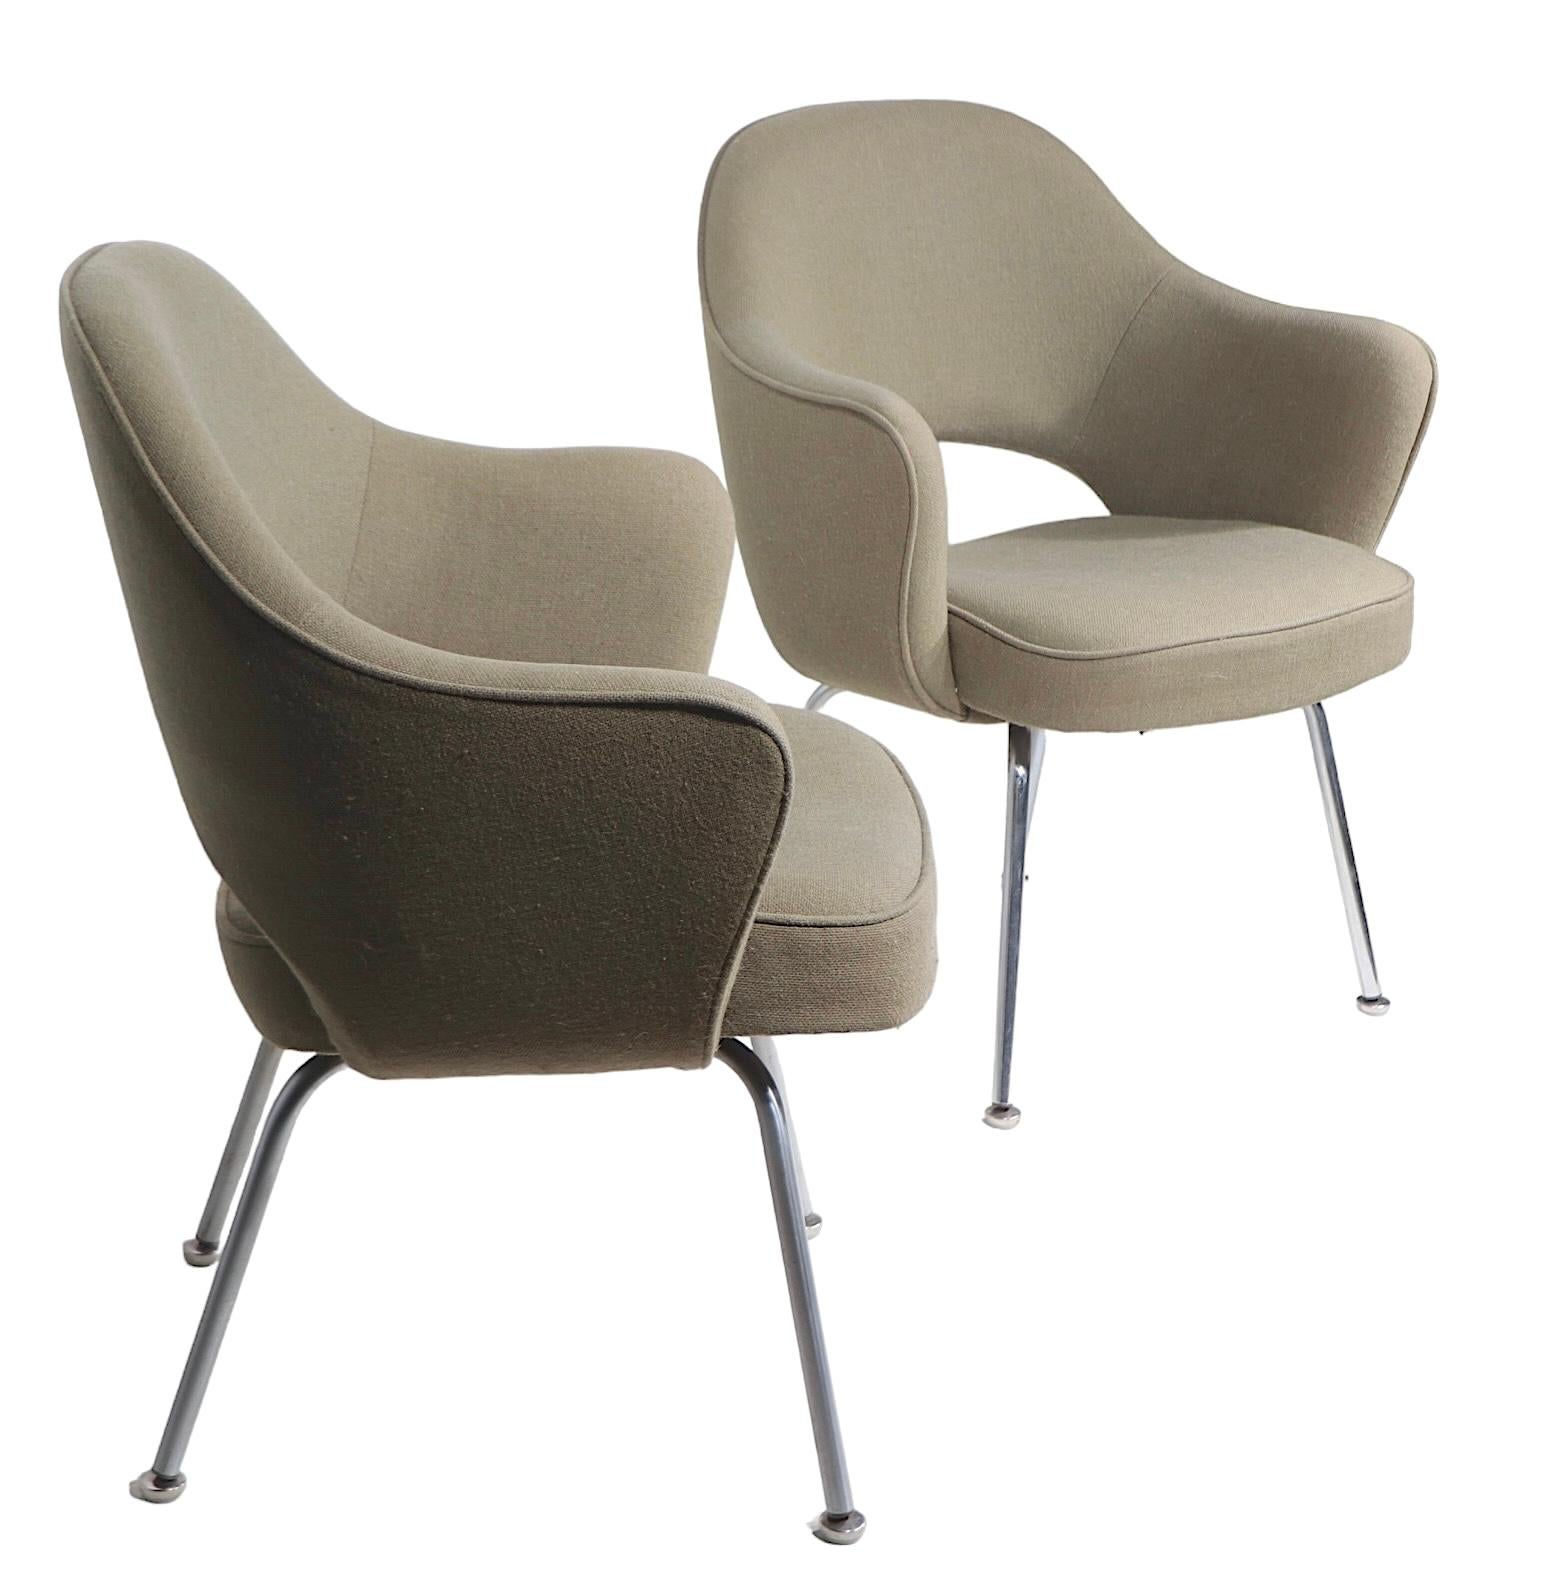 Pr. Vintage Saarinen for Knoll Executive Chairs c. 1960/70's For Sale 8